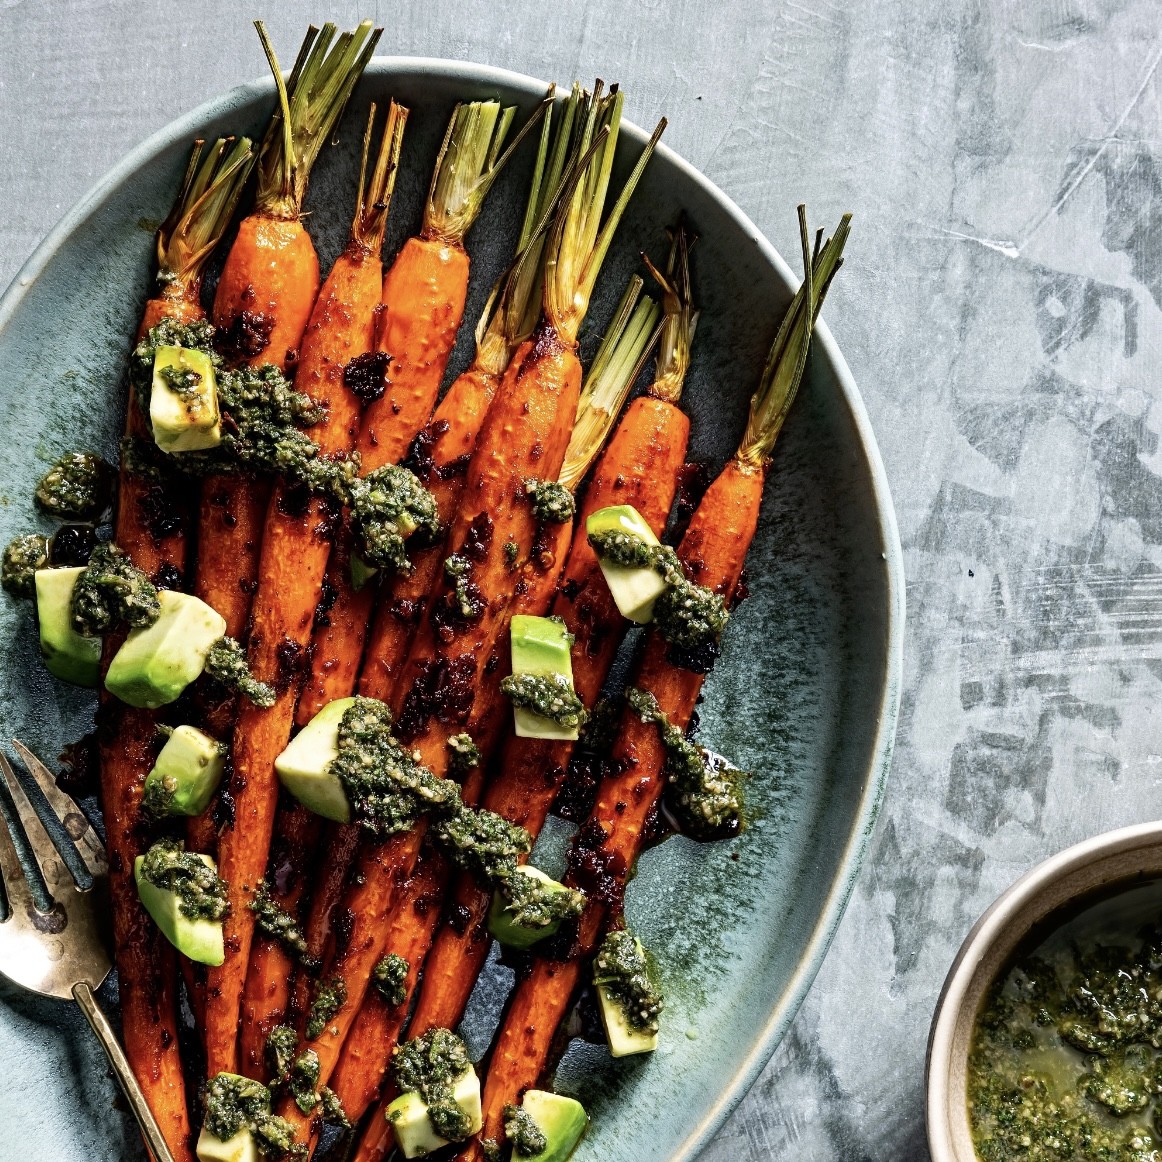 Image of Roasted Harissa Carrots With Carrot-Top Pesto and Avocado